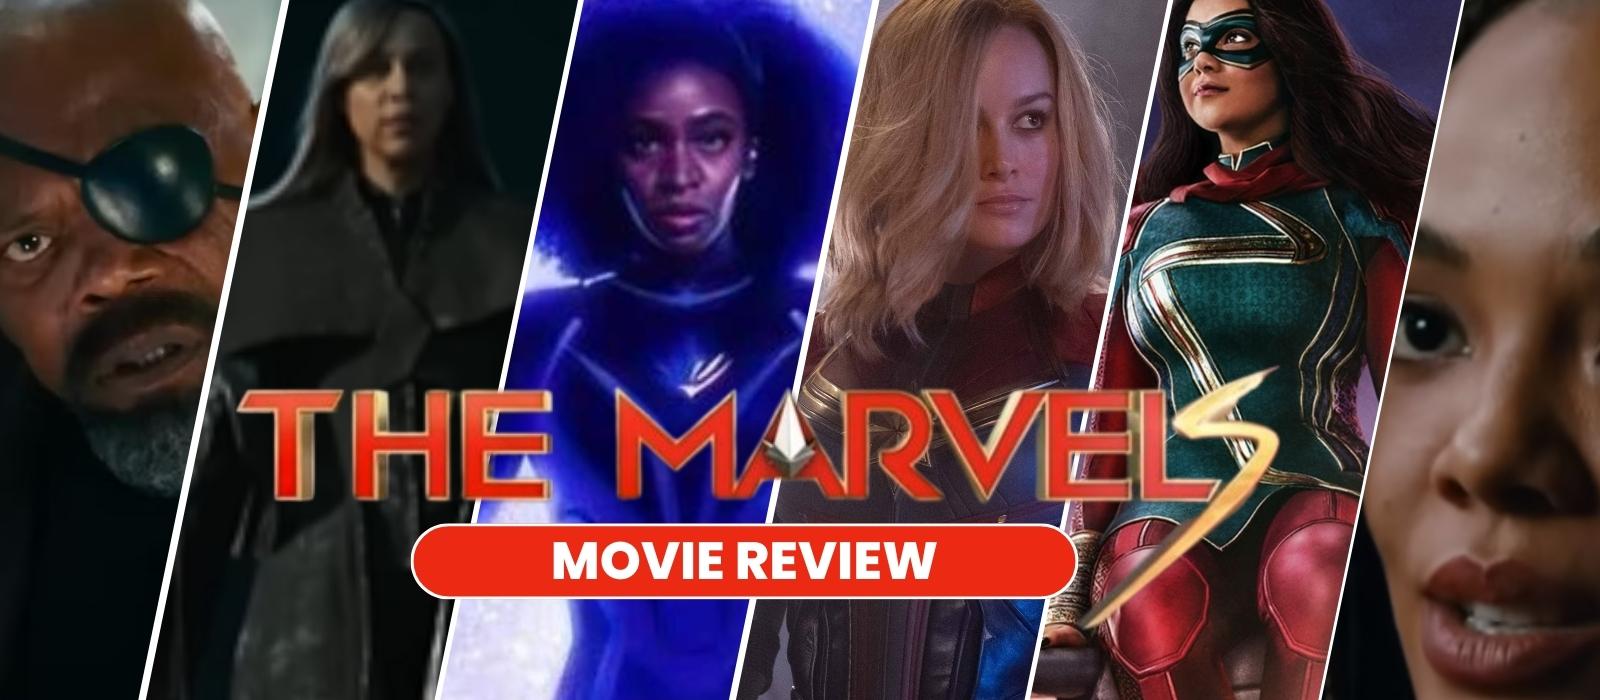 THE MARVELS MOVIE REVIEW